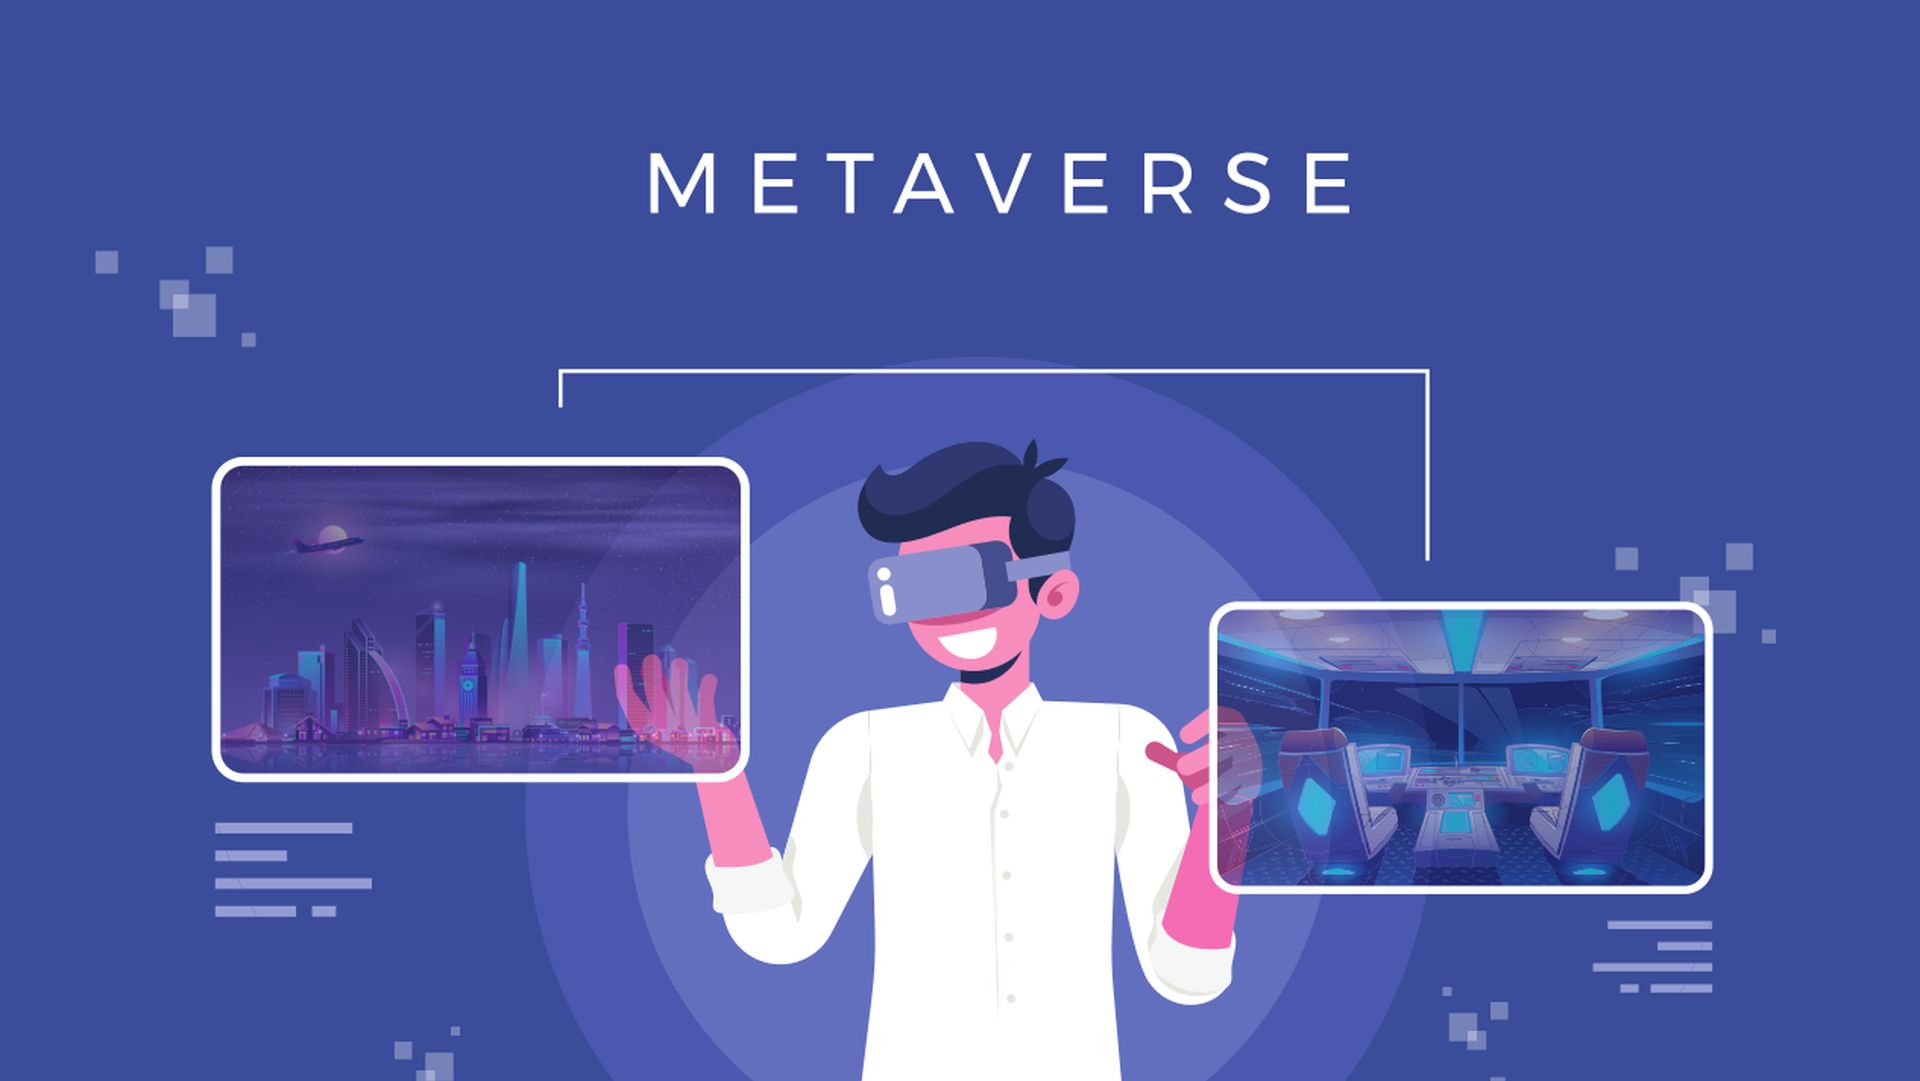 Today, we will be cover how to become a metaverse real estate agent, also answer what is metaverse real estate and how to invest in metaverse real estate.